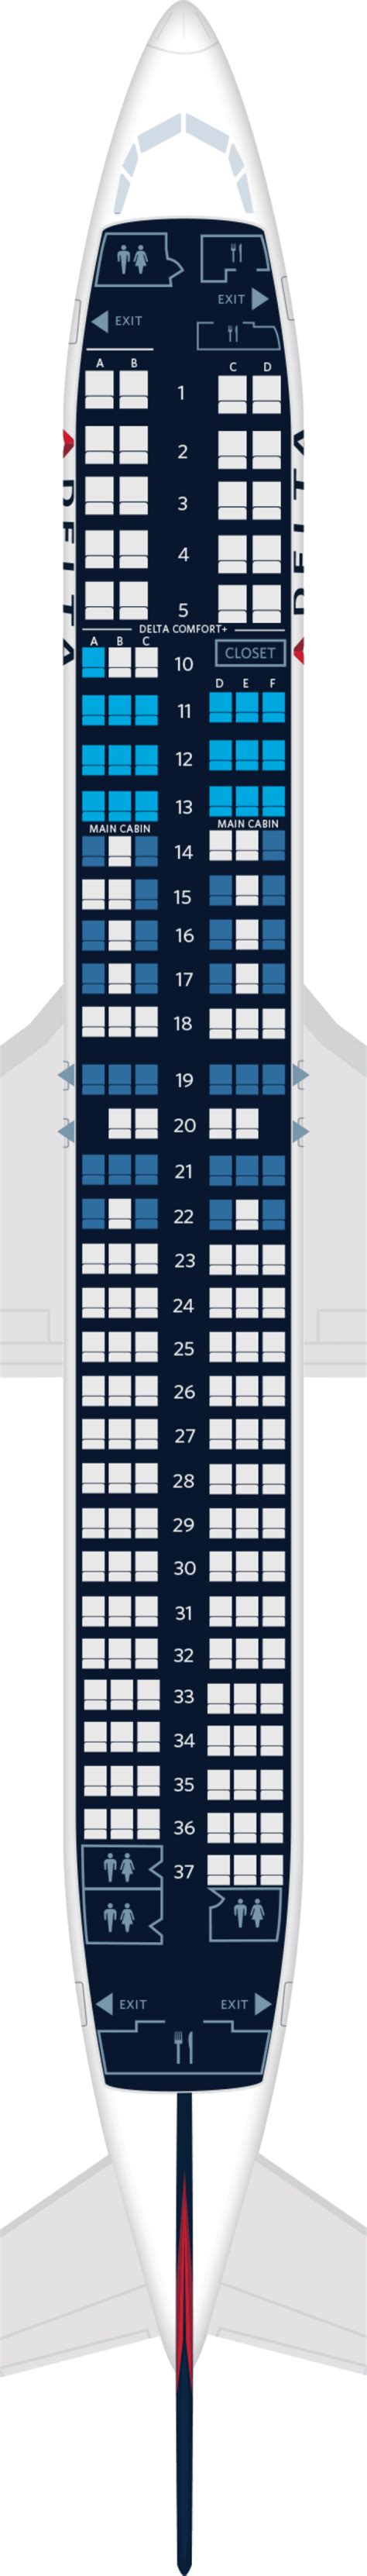 united airlines   seat map